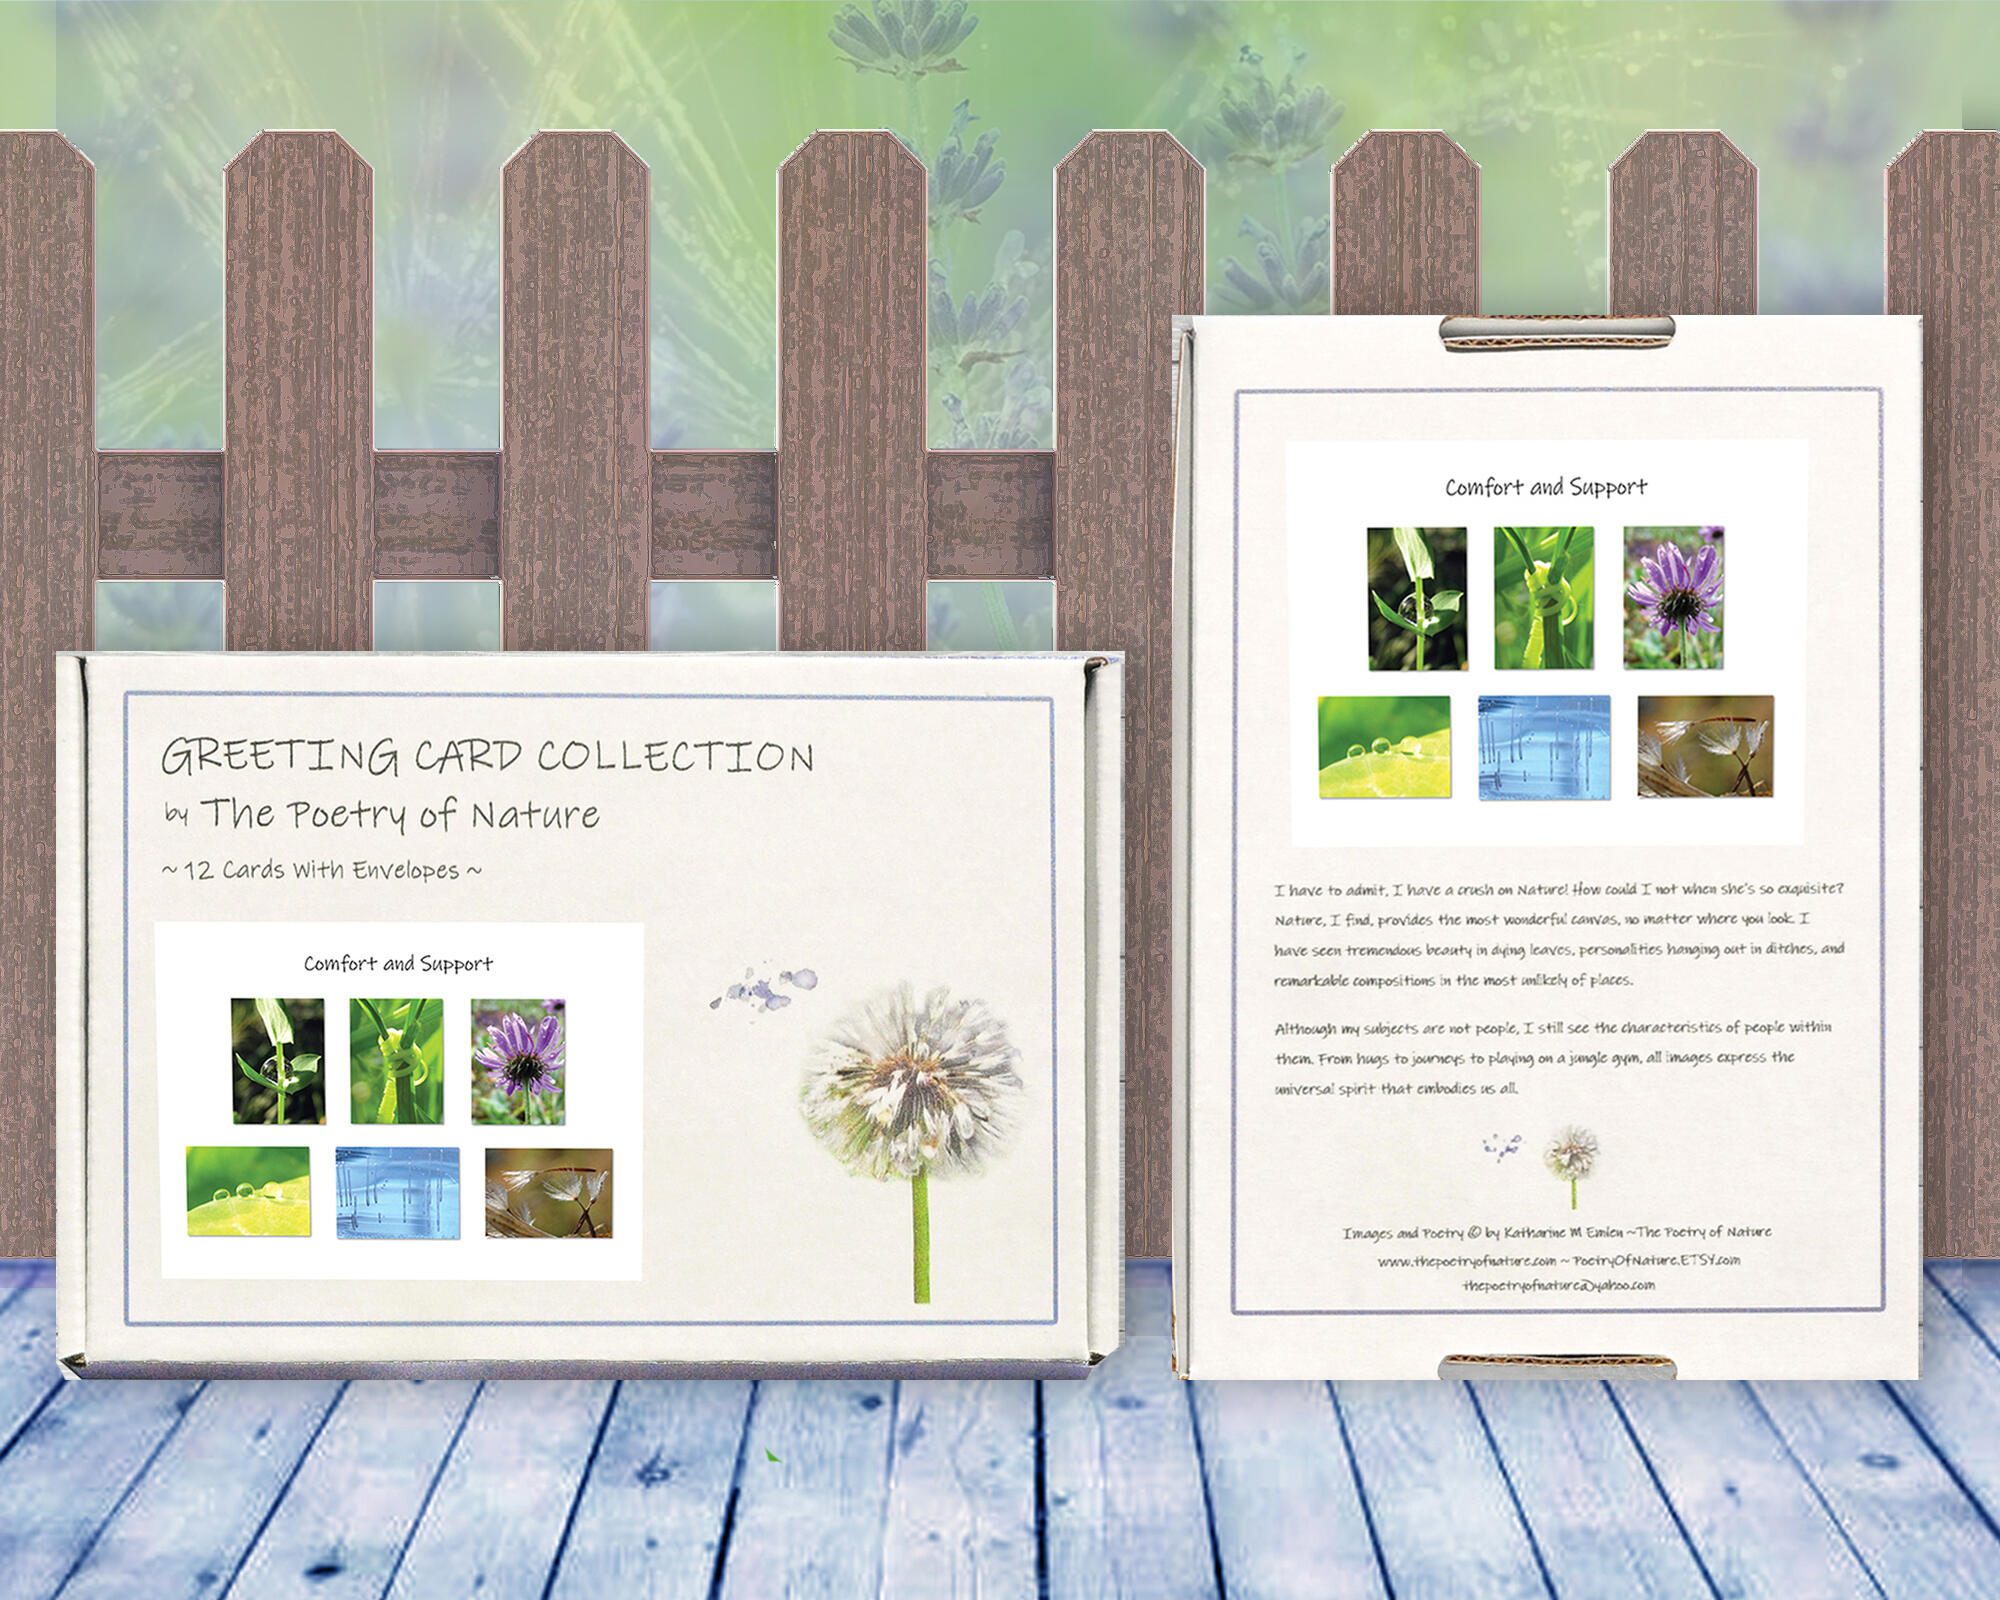 Comfort and Support - Greeting Card Collection by The Poetry of Nature